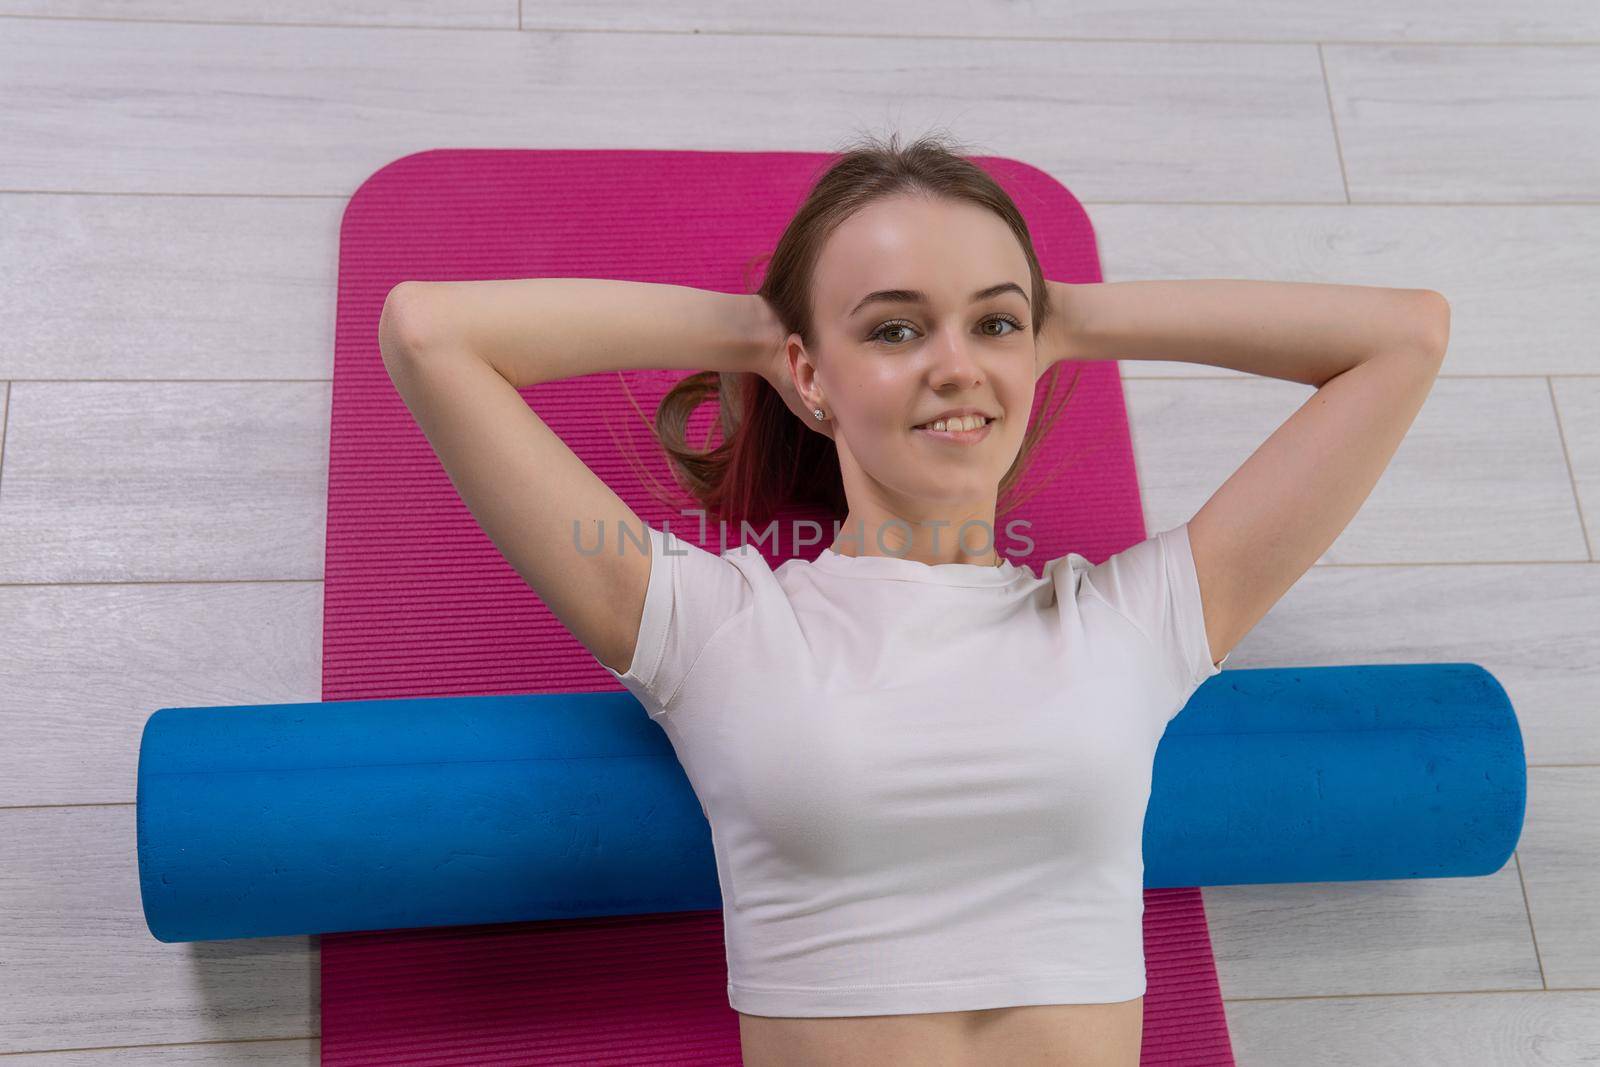 Roller the fitness mfr the on lies girl red mat mfr sportswear, from fit class for active from yoga body, stretching motivation. Gymnastics copy gym, smiling pose by 89167702191